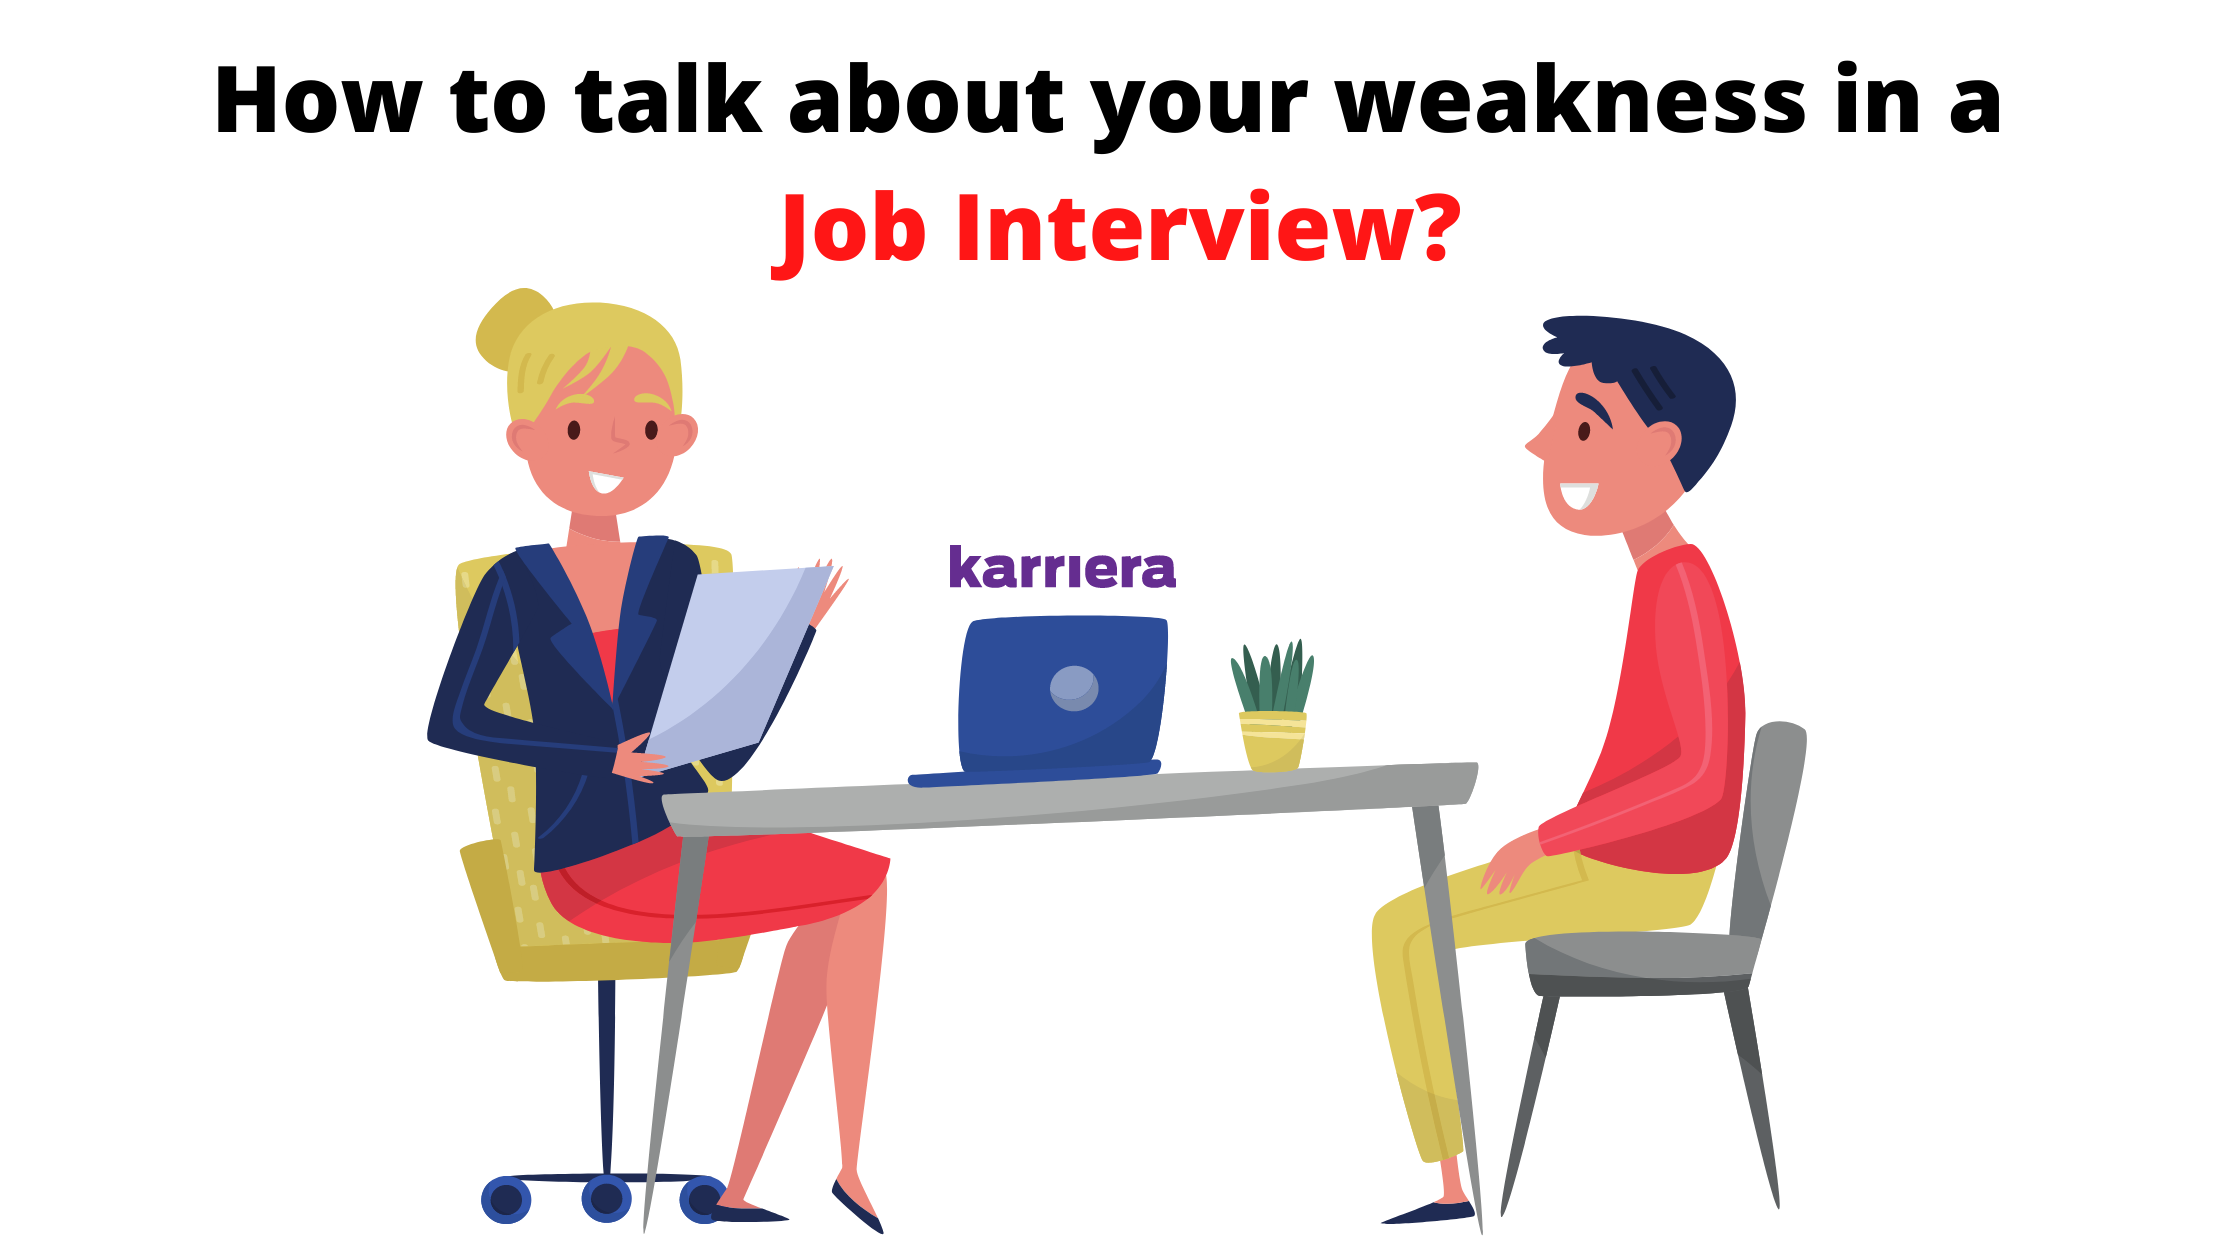 How to talk about your weakness in a Job Interview?